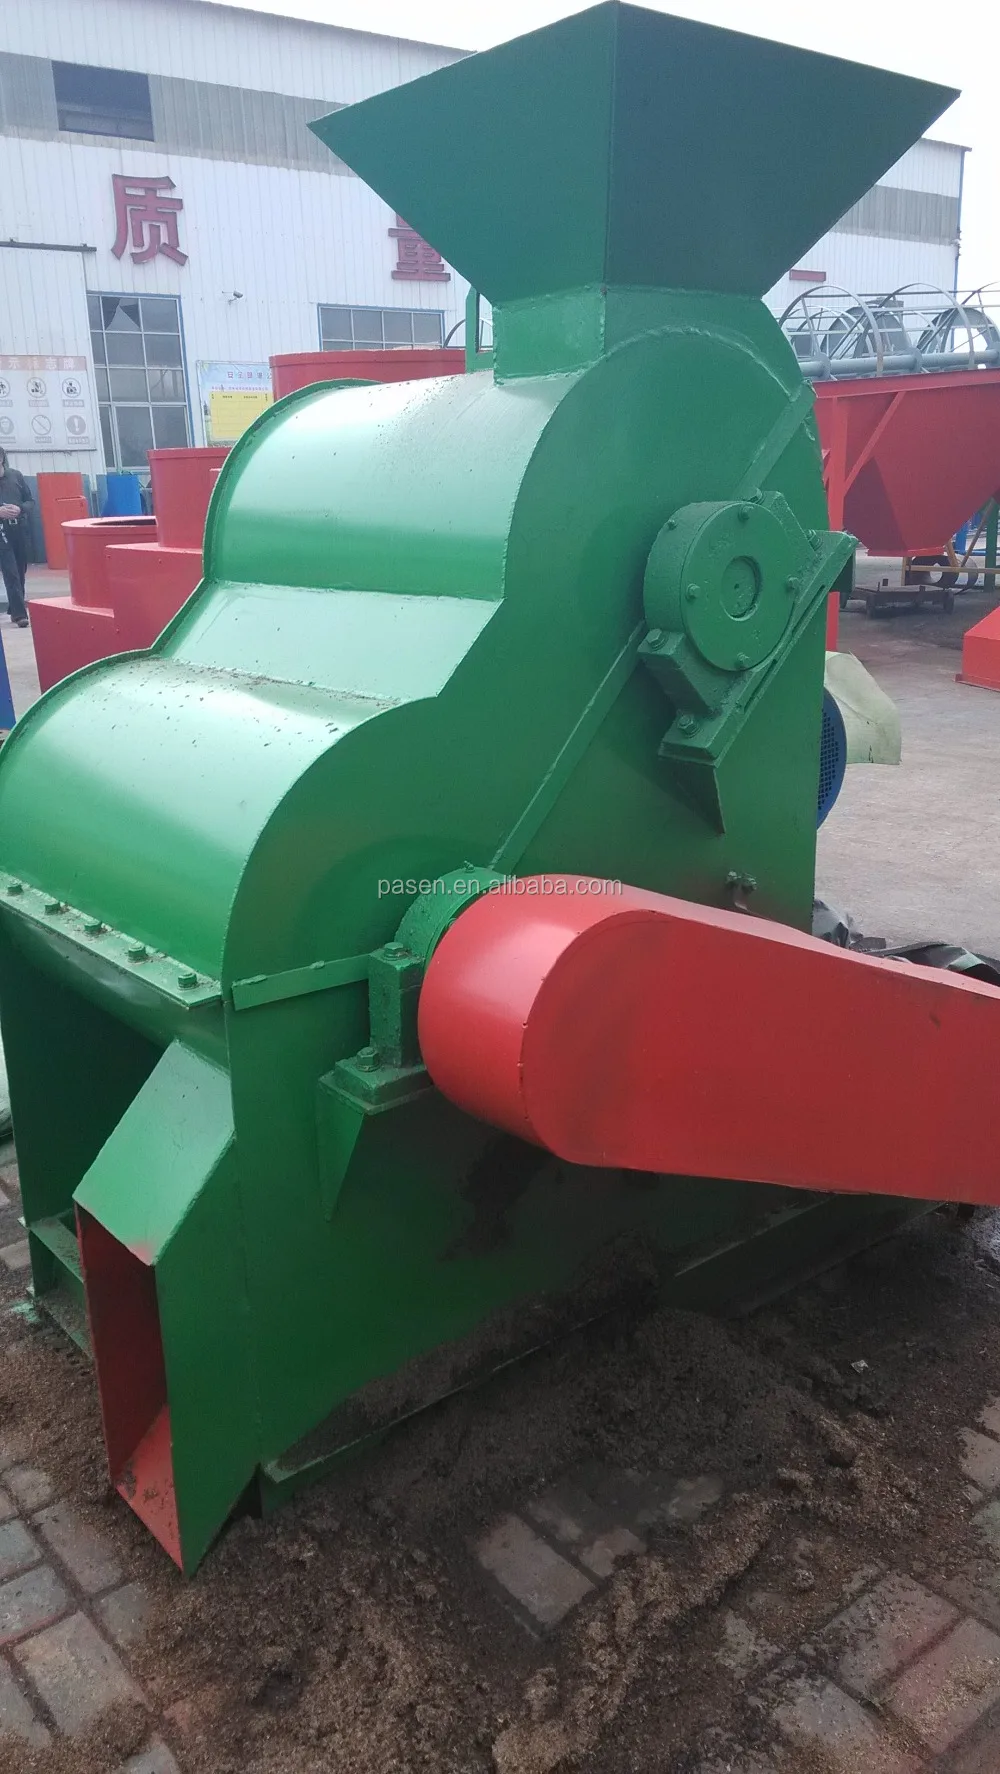 Used Compost Chopper for sale. Pasen equipment & more